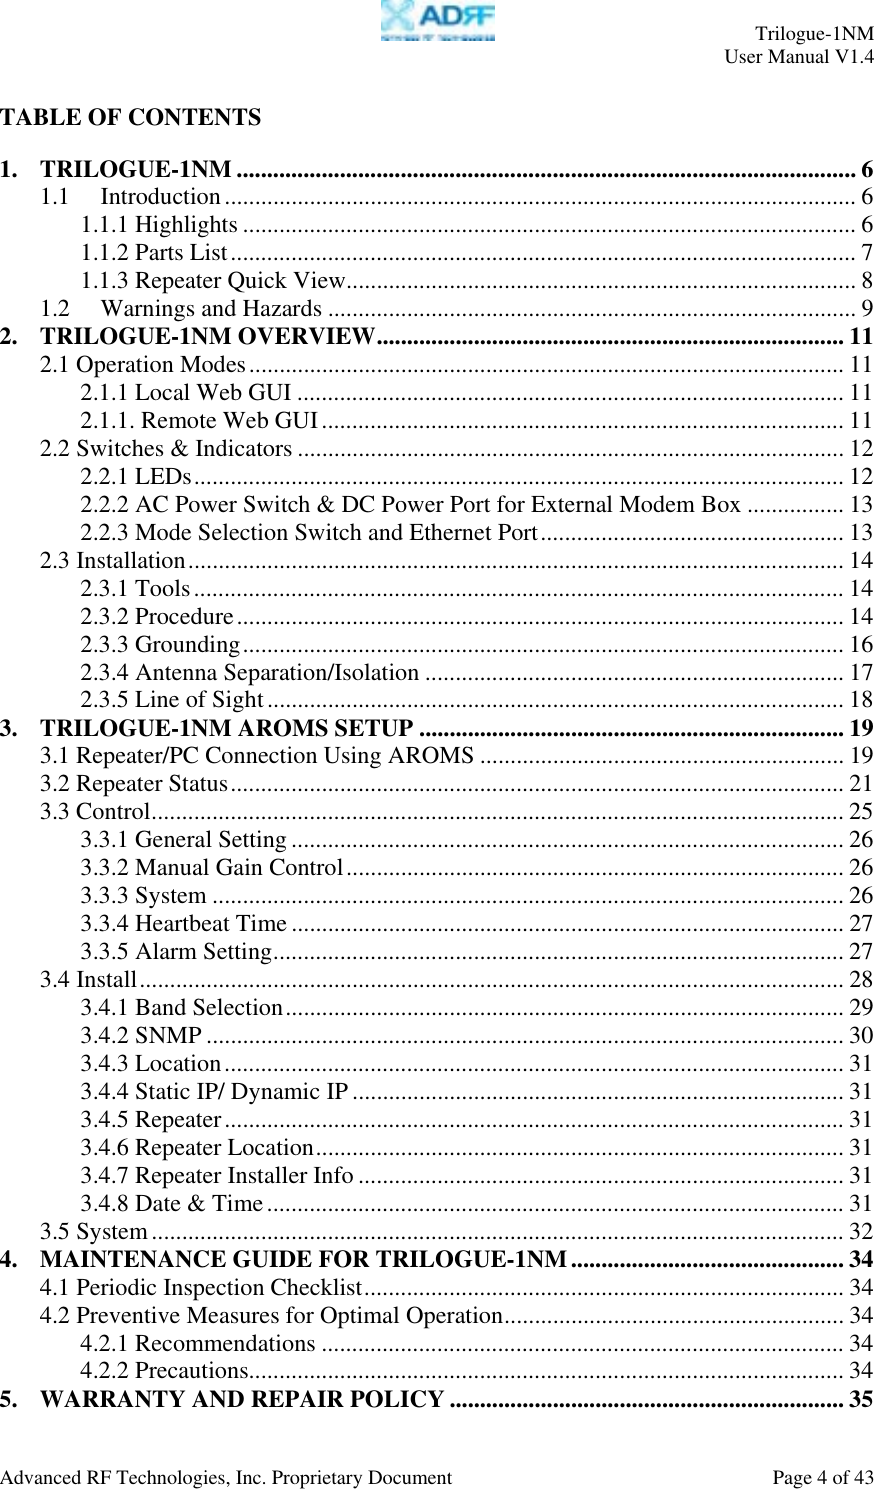     Trilogue-1NM User Manual V1.4  Advanced RF Technologies, Inc. Proprietary Document  Page 4 of 43  TABLE OF CONTENTS  1. TRILOGUE-1NM ...................................................................................................... 6 1.1 Introduction........................................................................................................ 6 1.1.1 Highlights ..................................................................................................... 6 1.1.2 Parts List....................................................................................................... 7 1.1.3 Repeater Quick View.................................................................................... 8 1.2 Warnings and Hazards ....................................................................................... 9 2. TRILOGUE-1NM OVERVIEW............................................................................. 11 2.1 Operation Modes.................................................................................................. 11 2.1.1 Local Web GUI .......................................................................................... 11 2.1.1. Remote Web GUI...................................................................................... 11 2.2 Switches &amp; Indicators .......................................................................................... 12 2.2.1 LEDs........................................................................................................... 12 2.2.2 AC Power Switch &amp; DC Power Port for External Modem Box ................ 13 2.2.3 Mode Selection Switch and Ethernet Port.................................................. 13 2.3 Installation............................................................................................................ 14 2.3.1 Tools........................................................................................................... 14 2.3.2 Procedure.................................................................................................... 14 2.3.3 Grounding................................................................................................... 16 2.3.4 Antenna Separation/Isolation ..................................................................... 17 2.3.5 Line of Sight............................................................................................... 18 3. TRILOGUE-1NM AROMS SETUP ...................................................................... 19 3.1 Repeater/PC Connection Using AROMS ............................................................ 19 3.2 Repeater Status..................................................................................................... 21 3.3 Control.................................................................................................................. 25 3.3.1 General Setting........................................................................................... 26 3.3.2 Manual Gain Control.................................................................................. 26 3.3.3 System ........................................................................................................ 26 3.3.4 Heartbeat Time ........................................................................................... 27 3.3.5 Alarm Setting.............................................................................................. 27 3.4 Install.................................................................................................................... 28 3.4.1 Band Selection............................................................................................ 29 3.4.2 SNMP ......................................................................................................... 30 3.4.3 Location...................................................................................................... 31 3.4.4 Static IP/ Dynamic IP ................................................................................. 31 3.4.5 Repeater...................................................................................................... 31 3.4.6 Repeater Location....................................................................................... 31 3.4.7 Repeater Installer Info ................................................................................ 31 3.4.8 Date &amp; Time............................................................................................... 31 3.5 System.................................................................................................................. 32 4. MAINTENANCE GUIDE FOR TRILOGUE-1NM............................................. 34 4.1 Periodic Inspection Checklist............................................................................... 34 4.2 Preventive Measures for Optimal Operation........................................................ 34 4.2.1 Recommendations ...................................................................................... 34 4.2.2 Precautions.................................................................................................. 34 5. WARRANTY AND REPAIR POLICY ................................................................. 35 